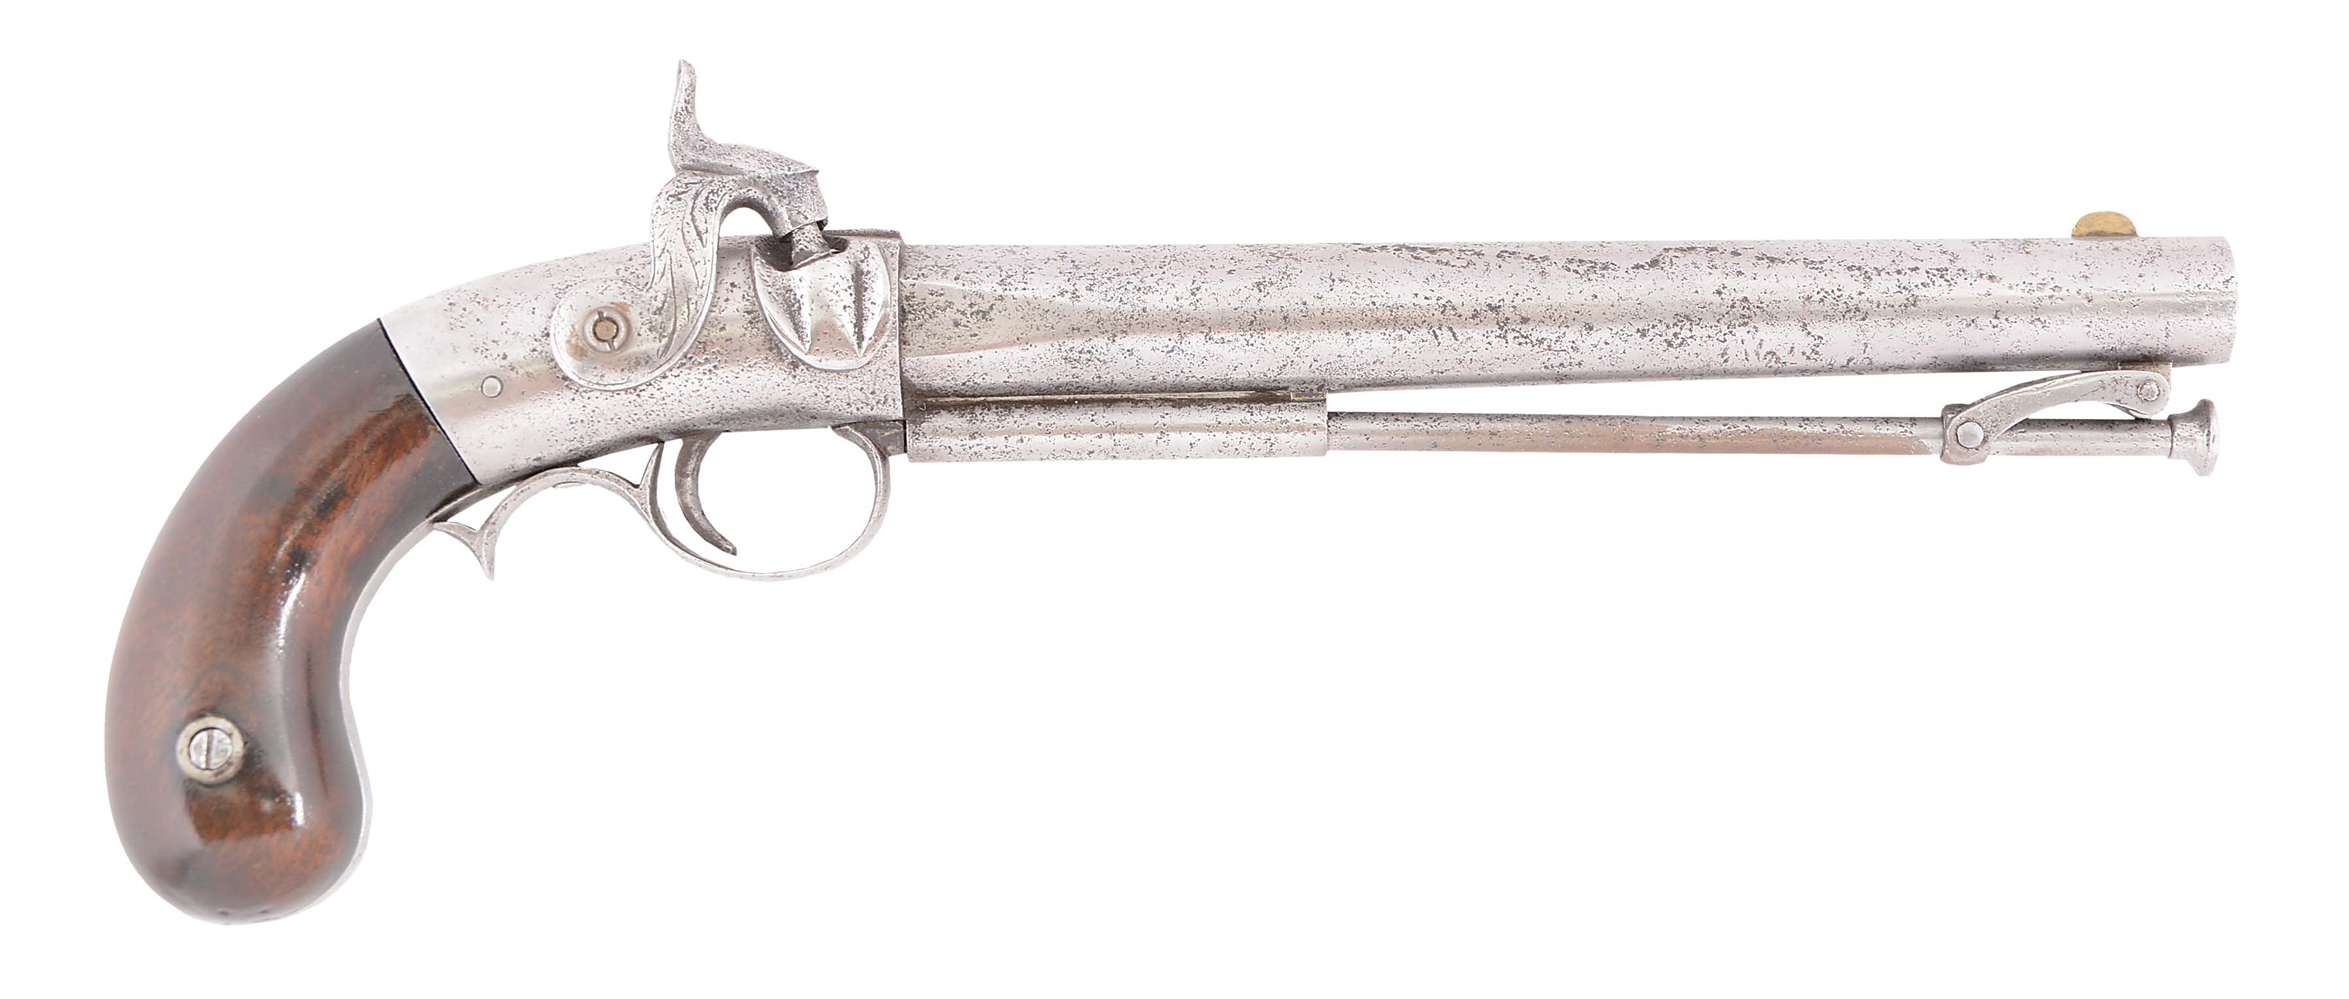 (A) A RARE WATERS ALL METAL SINGLE SHOT PERCUSSION PISTOL, CIRCA 1849, BY A.H. WATERS, MILBURY MASSACHUSSETS.